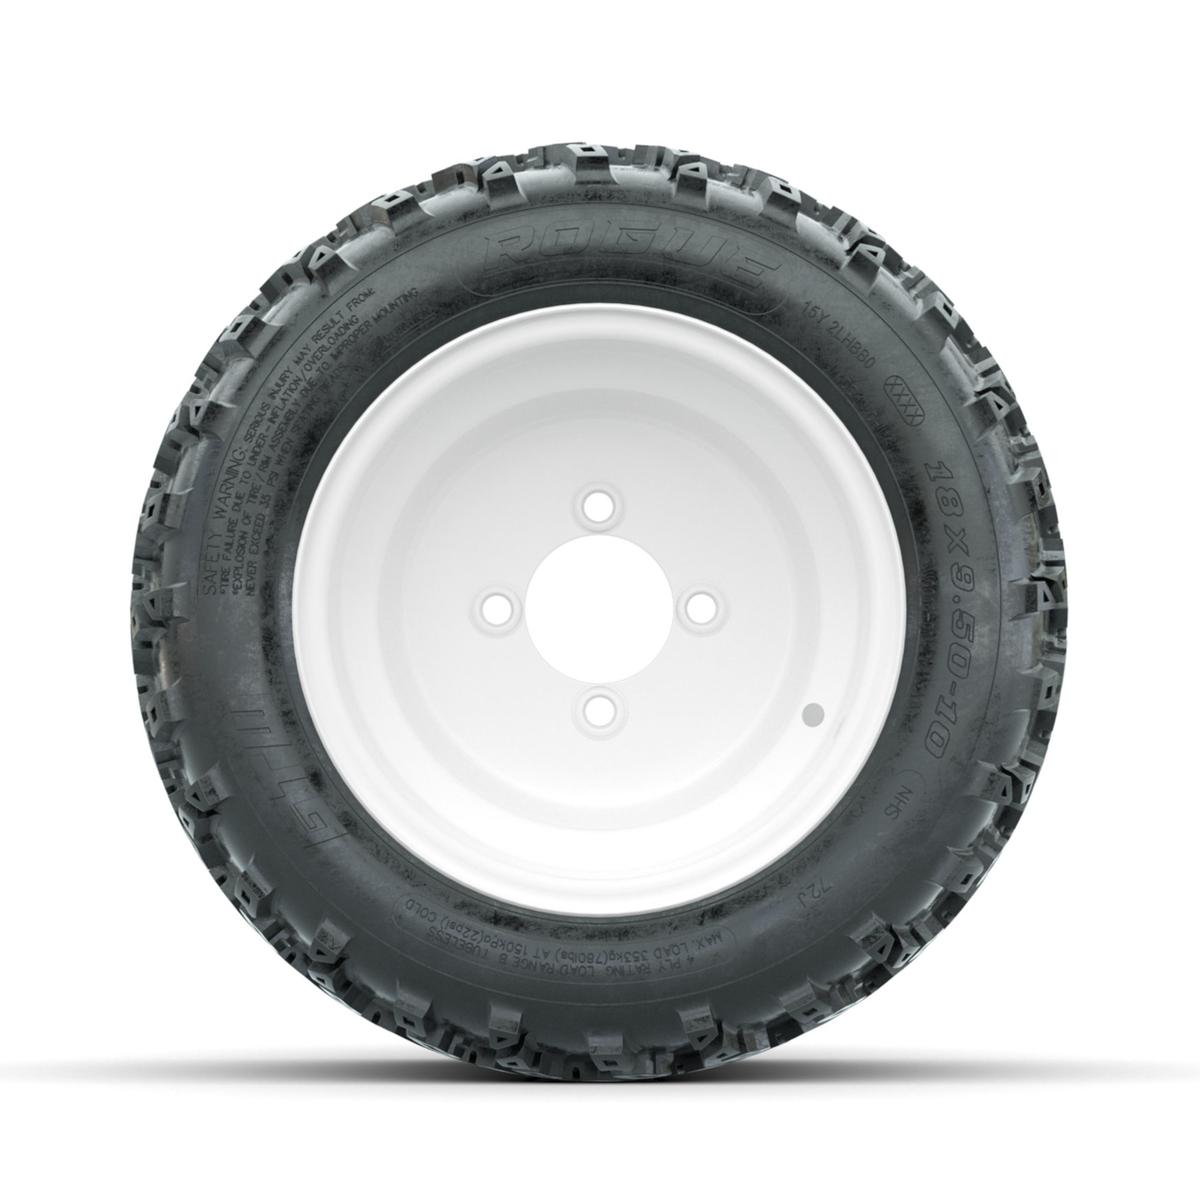 GTW Steel White Centered 10 in Wheels with 18x9.50-10 Rogue All Terrain Tires – Full Set